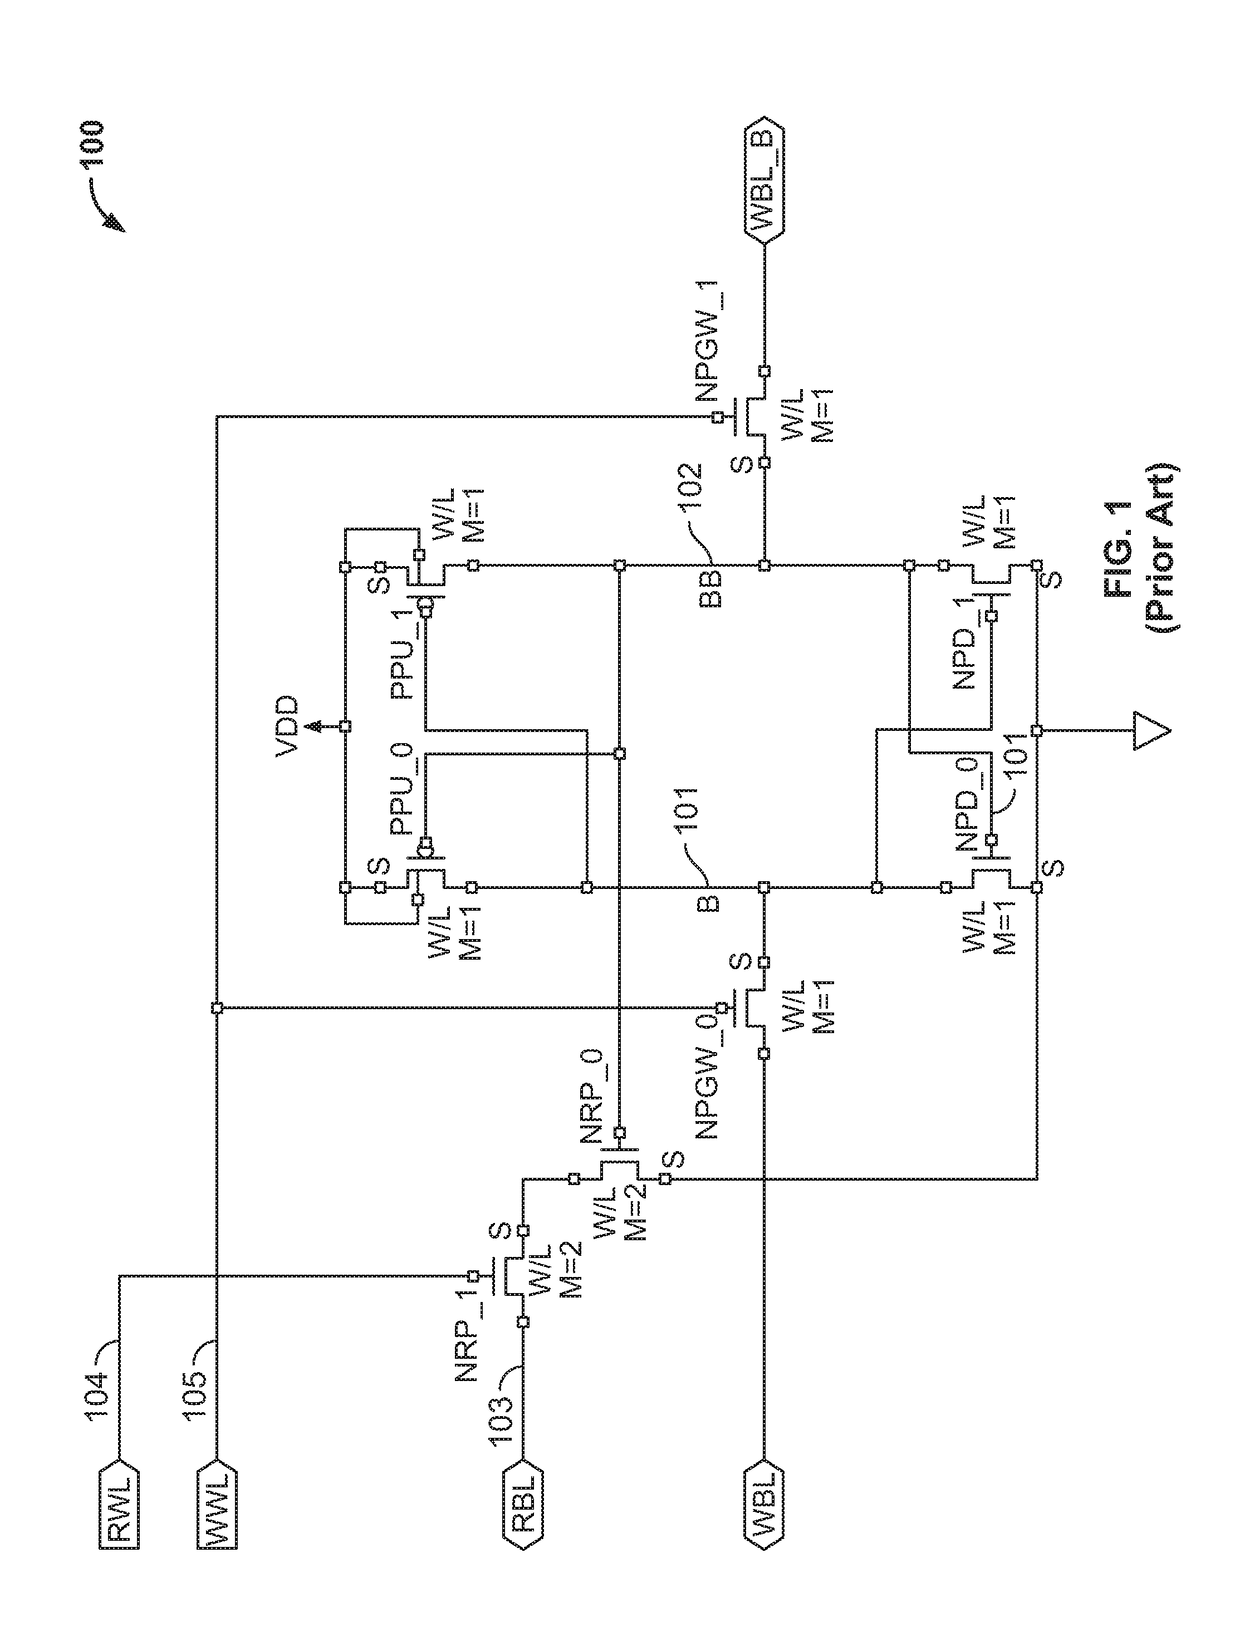 Systems and methods for a high performance memory cell structure